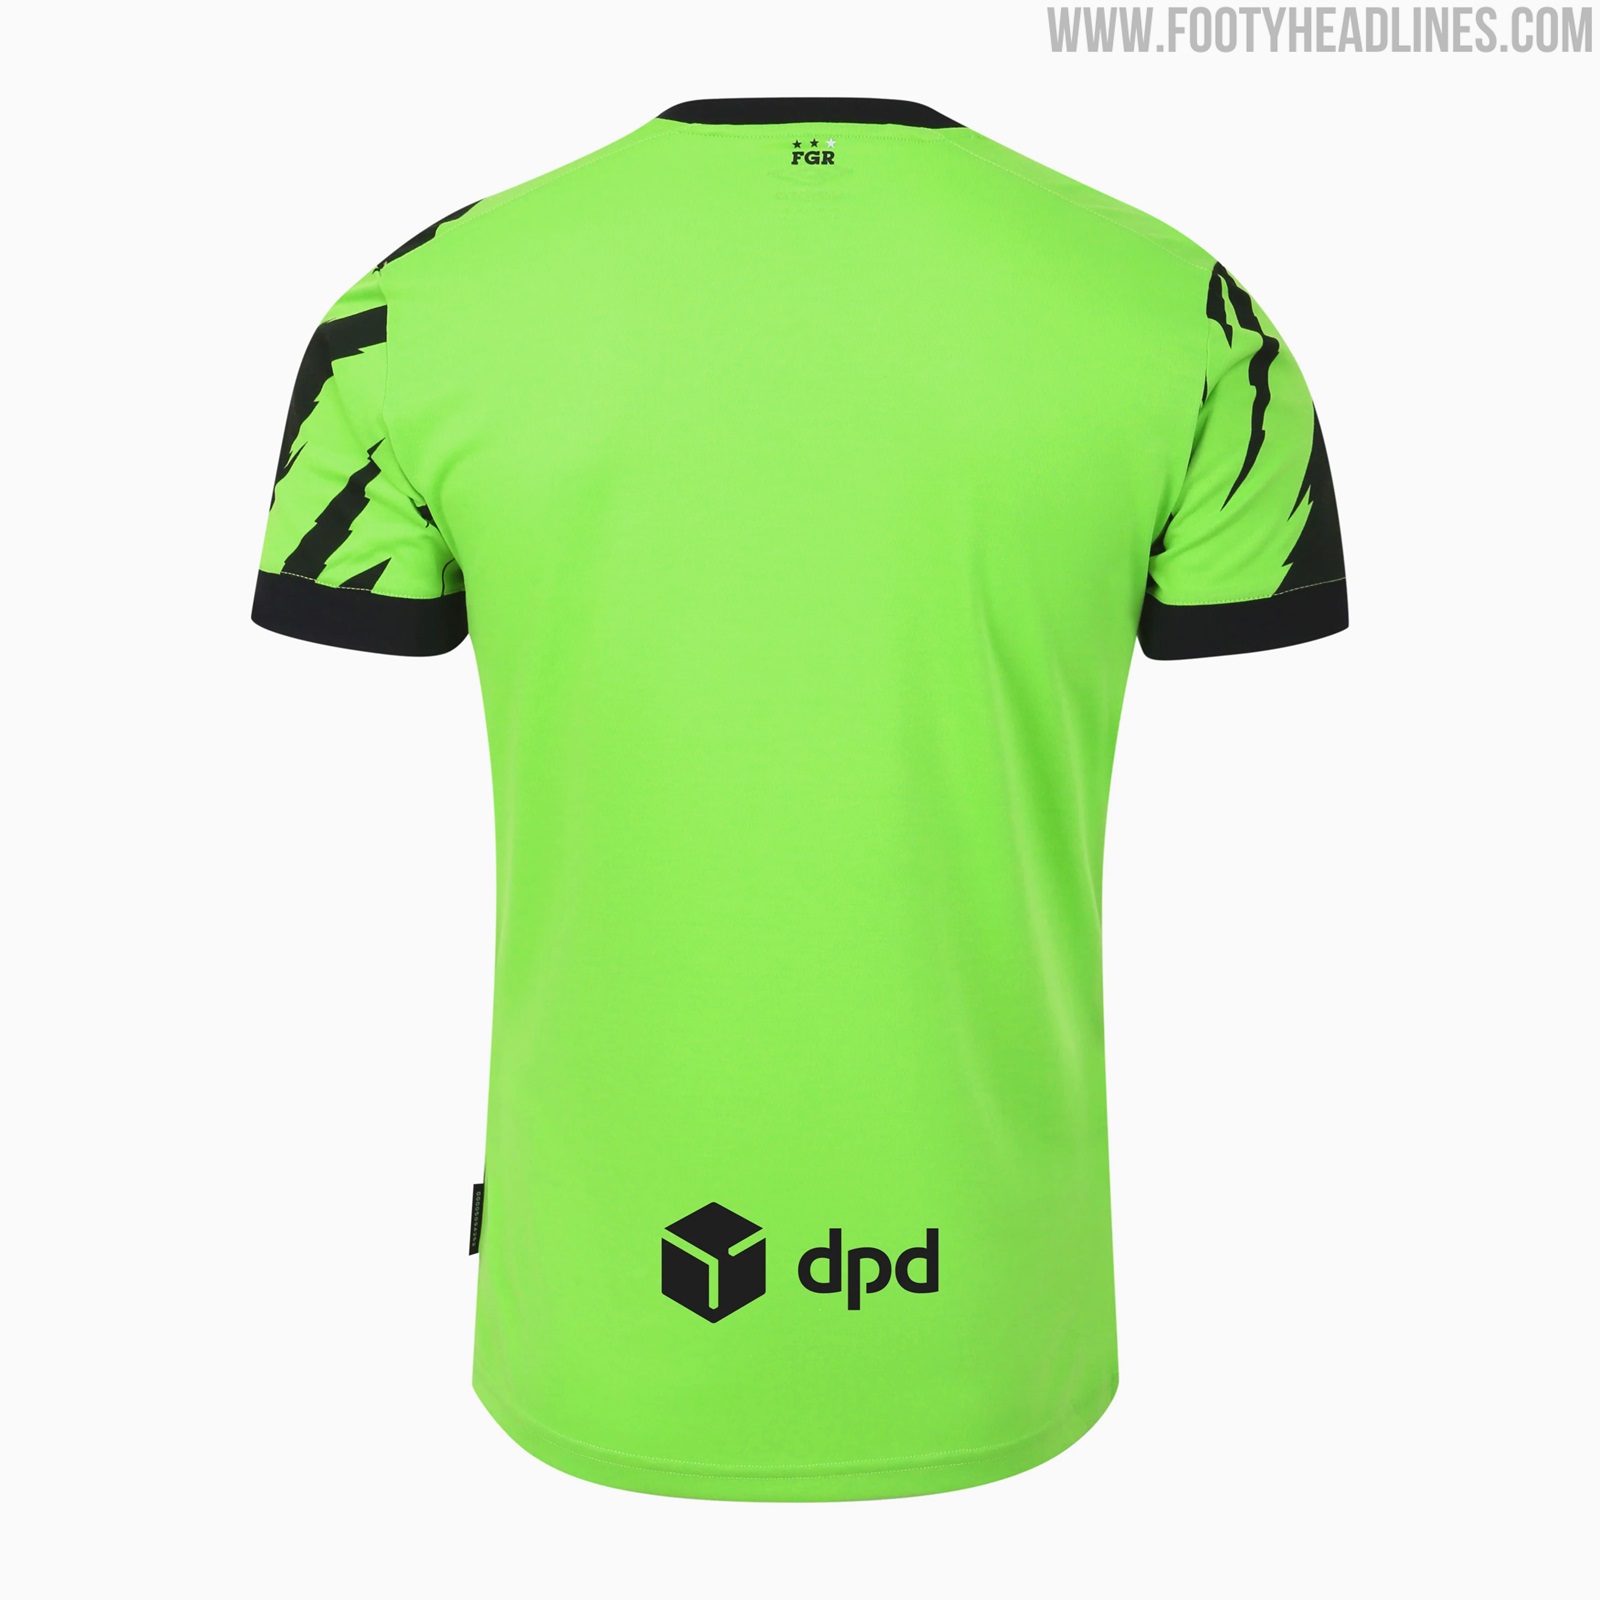 No More PlayerLayer - Umbro Forest Green Rovers 23-24 Home & Away